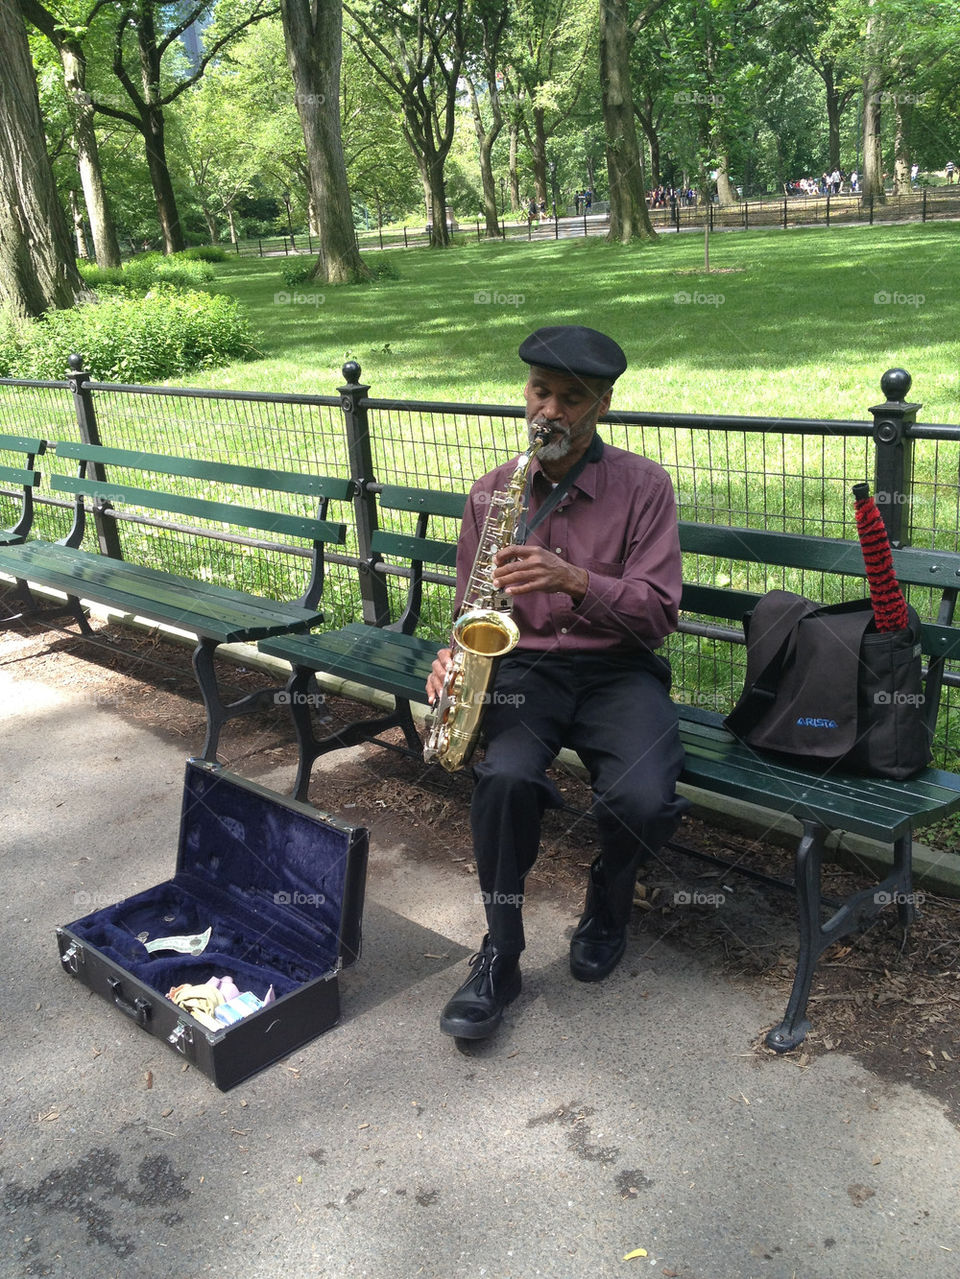 relax music nyc busker by pixiemelton